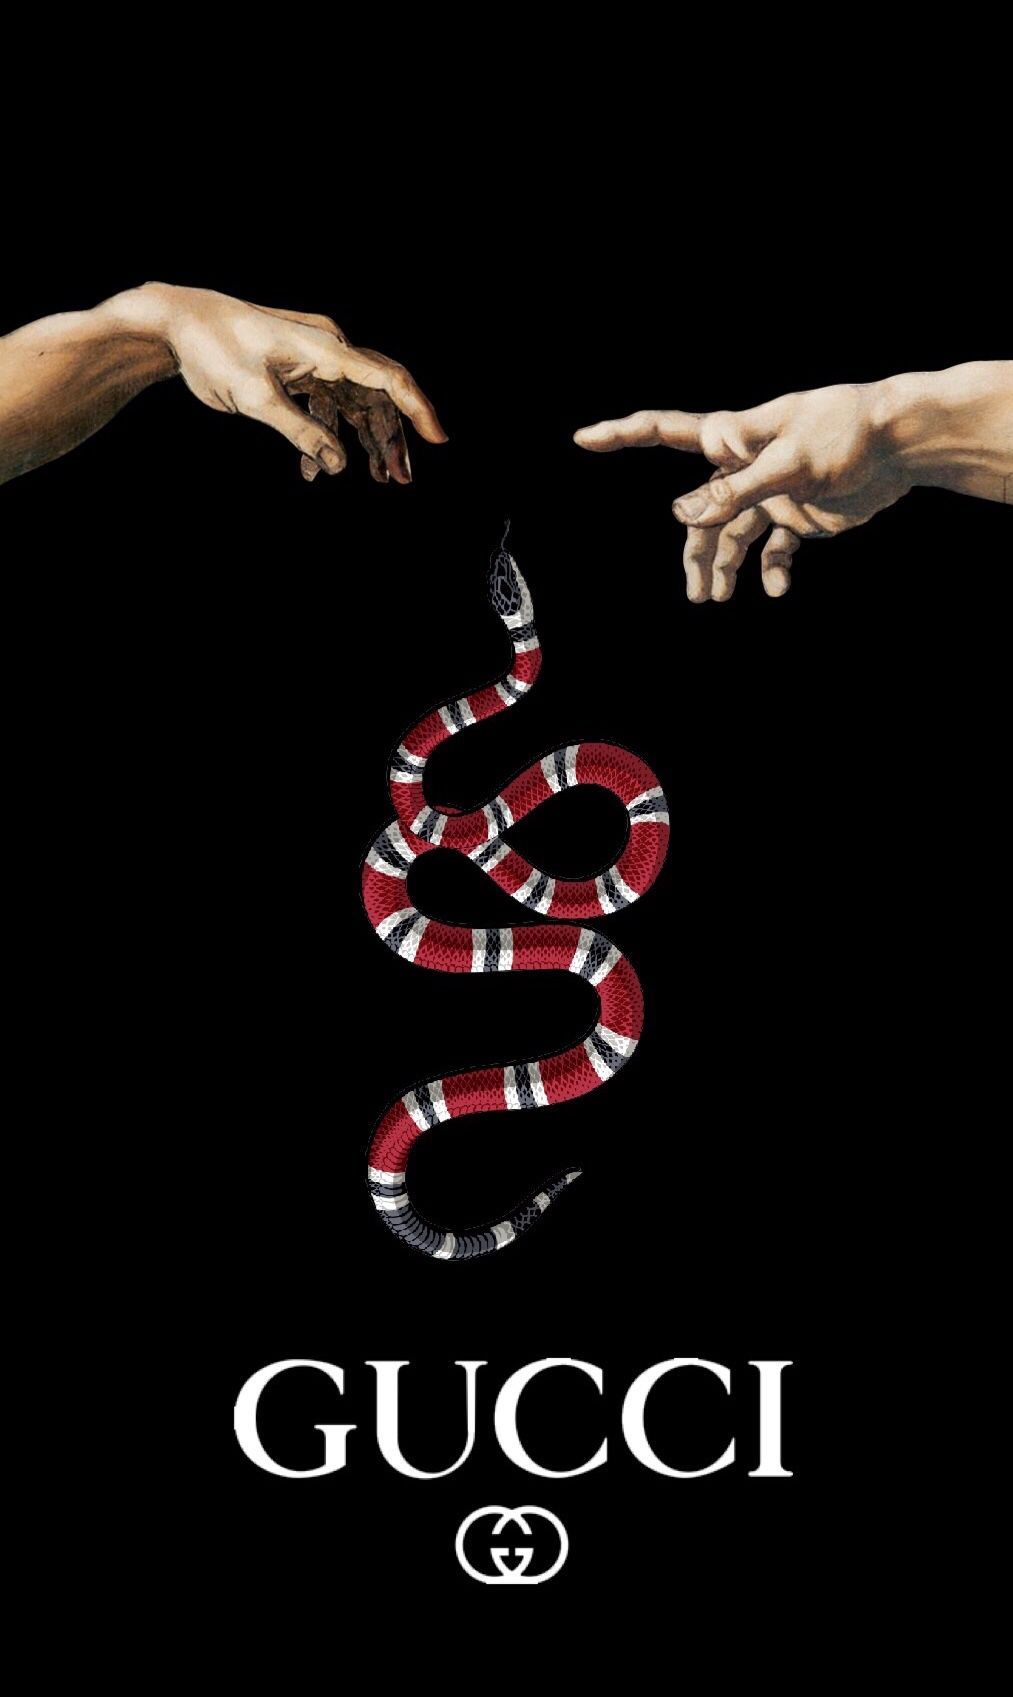 1013x1697 Gucci Snake With The Creation Of Adam Wallpaper Gucci